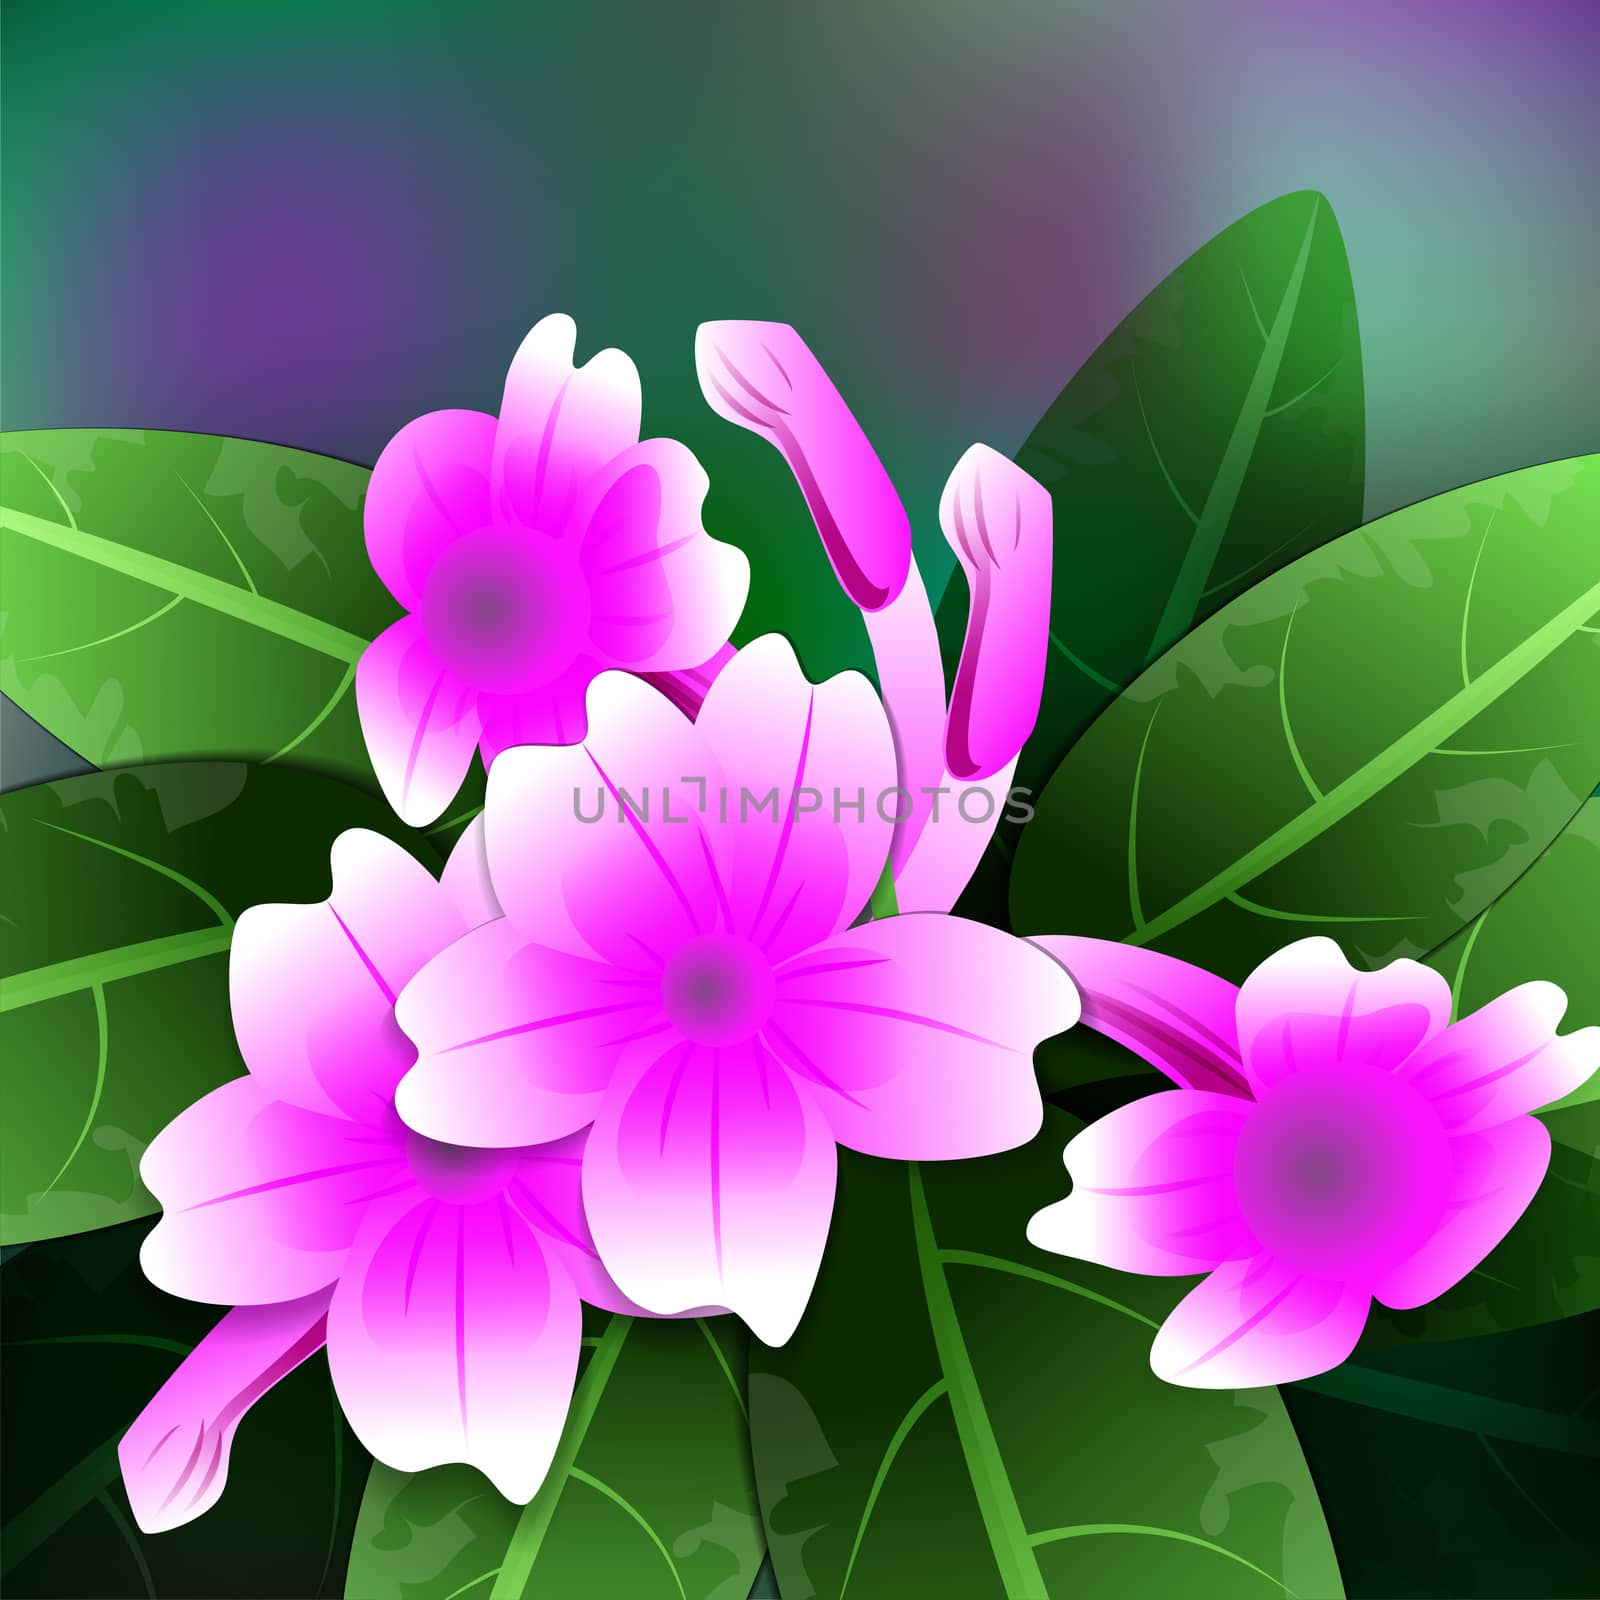 Beautiful spring flowers purple ruellia. Cards or your design with space for text. by Adamchuk